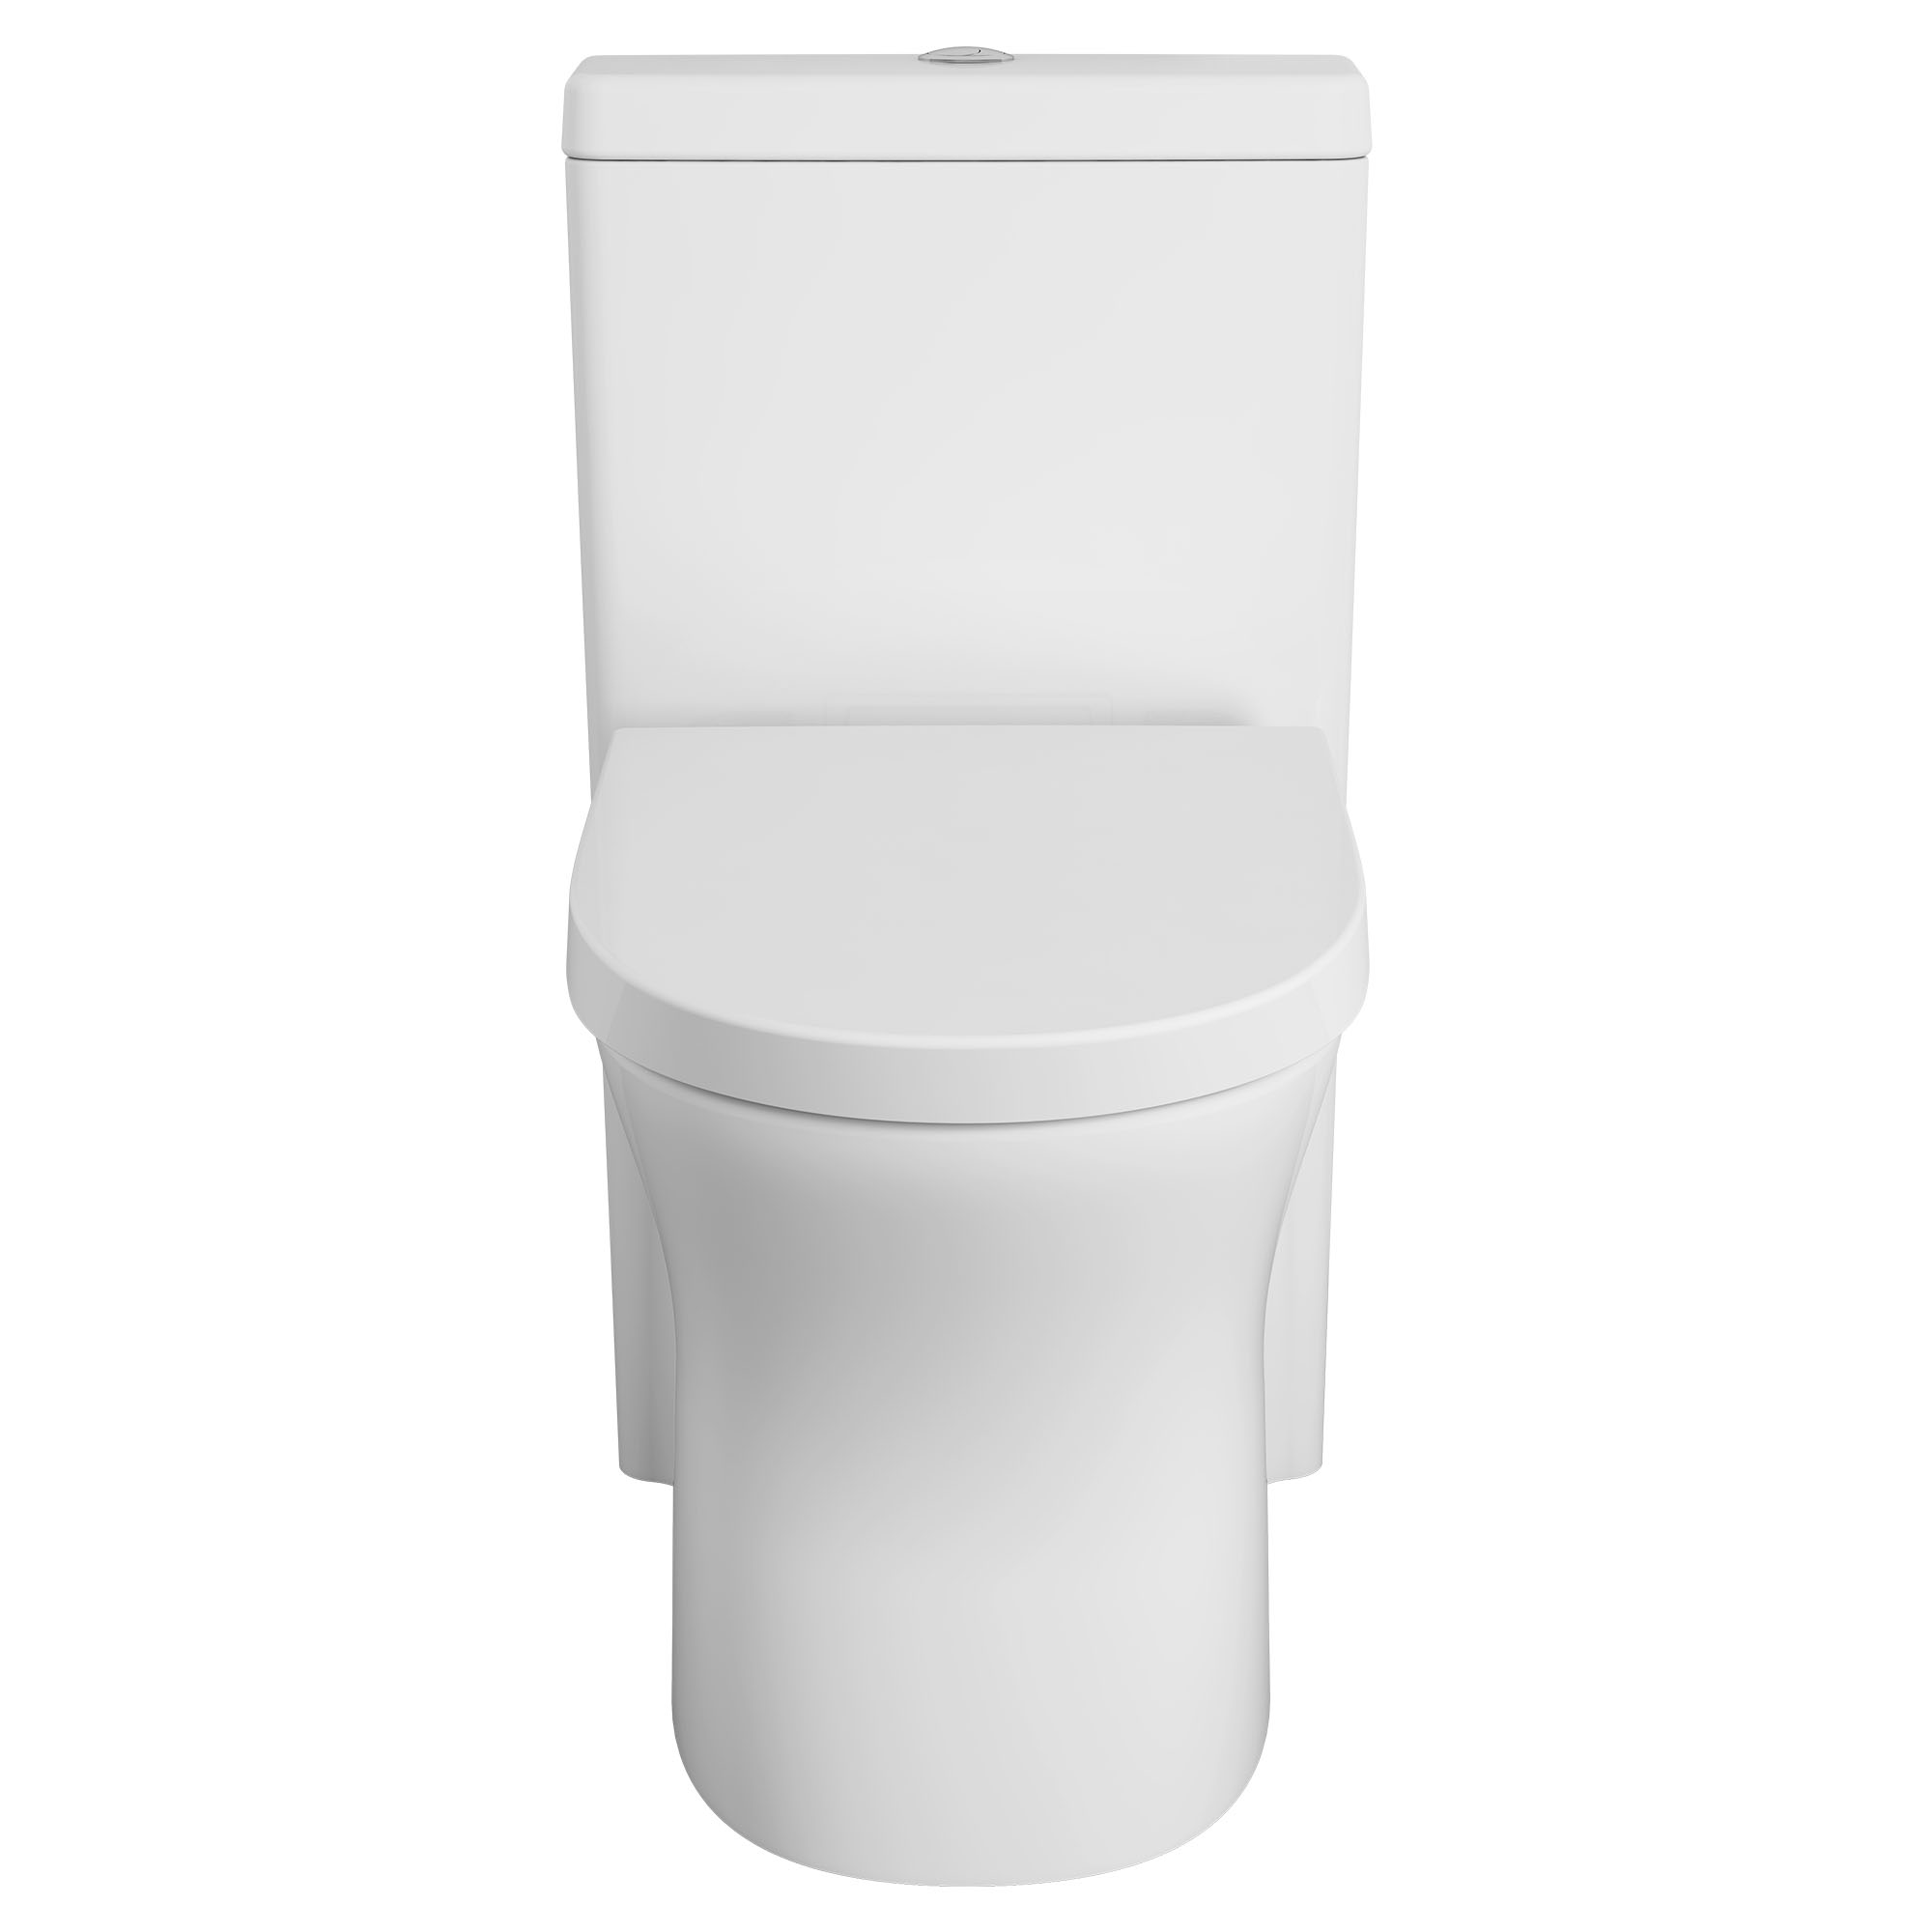 Cosette One-Piece Dual Flush 1.28 gpf/4.8 Lpf and 0.92 gpf/3.5 Lpf Standard Height Elongated Complete Toilet With Seat